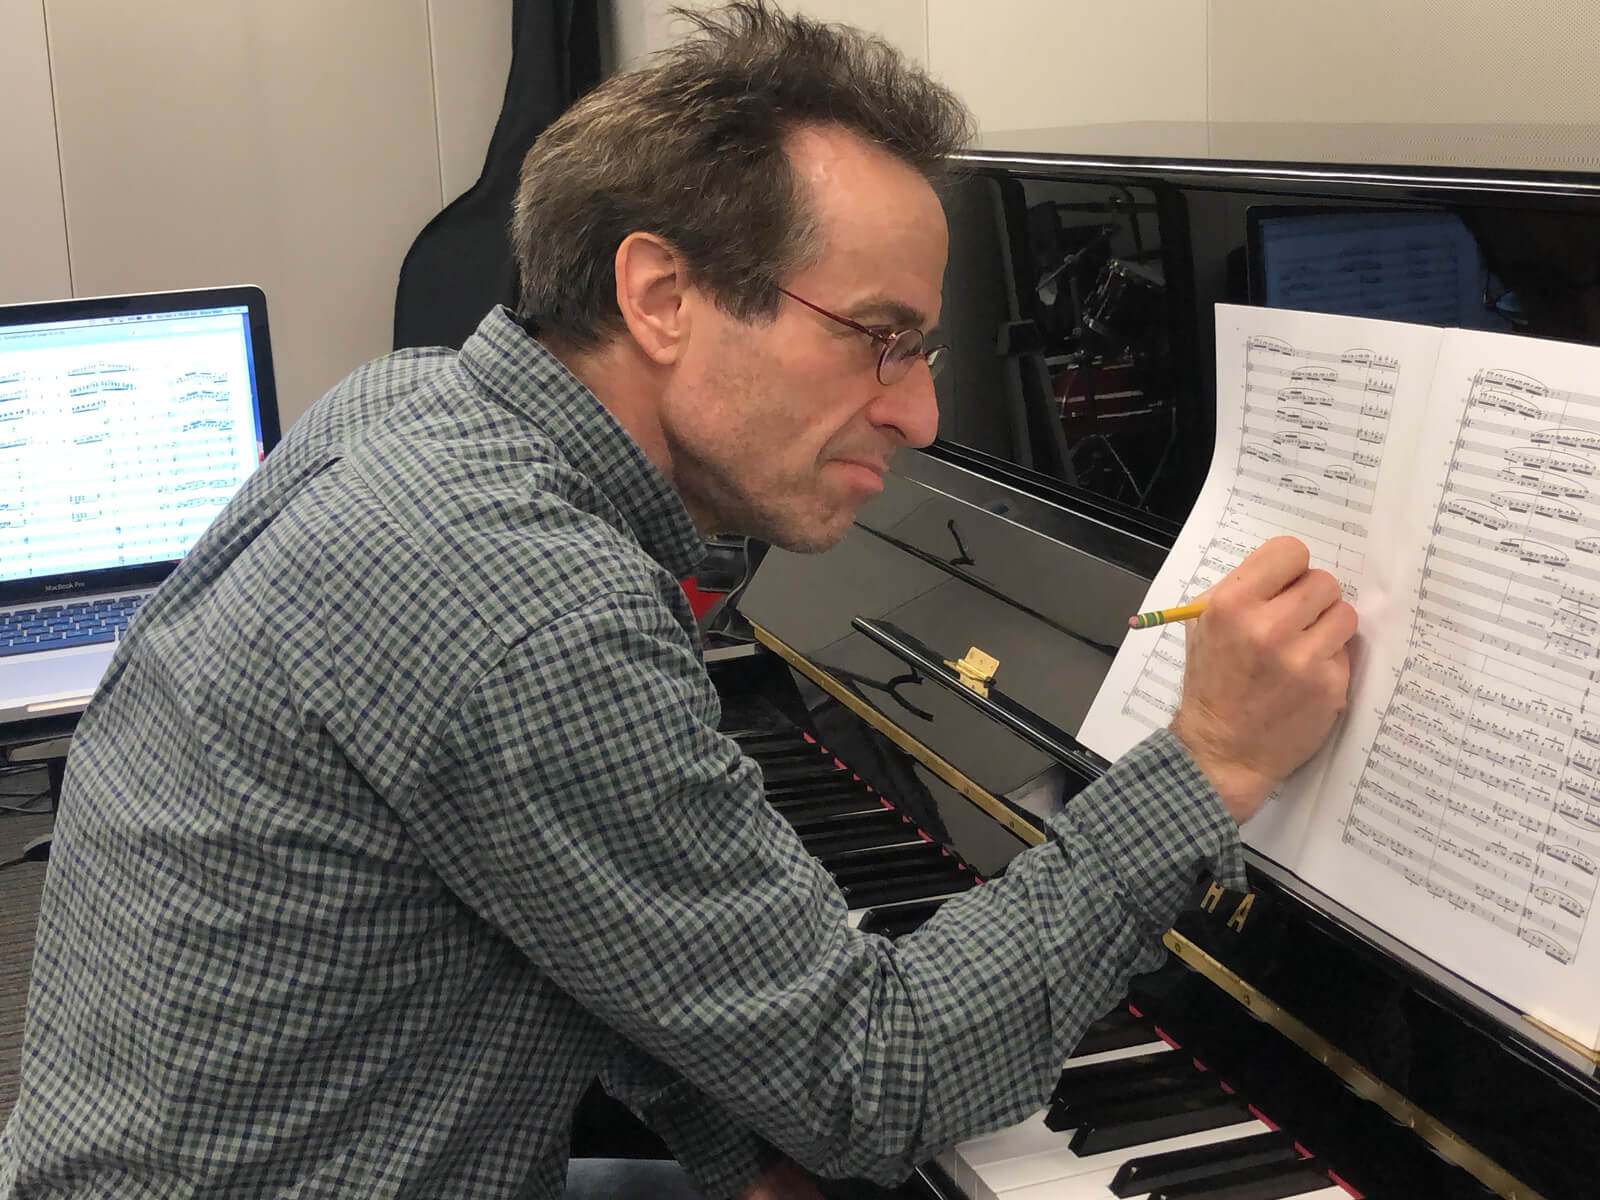 DigiPen music department chair Bruce Stark sitting at a piano, making notations on sheet music